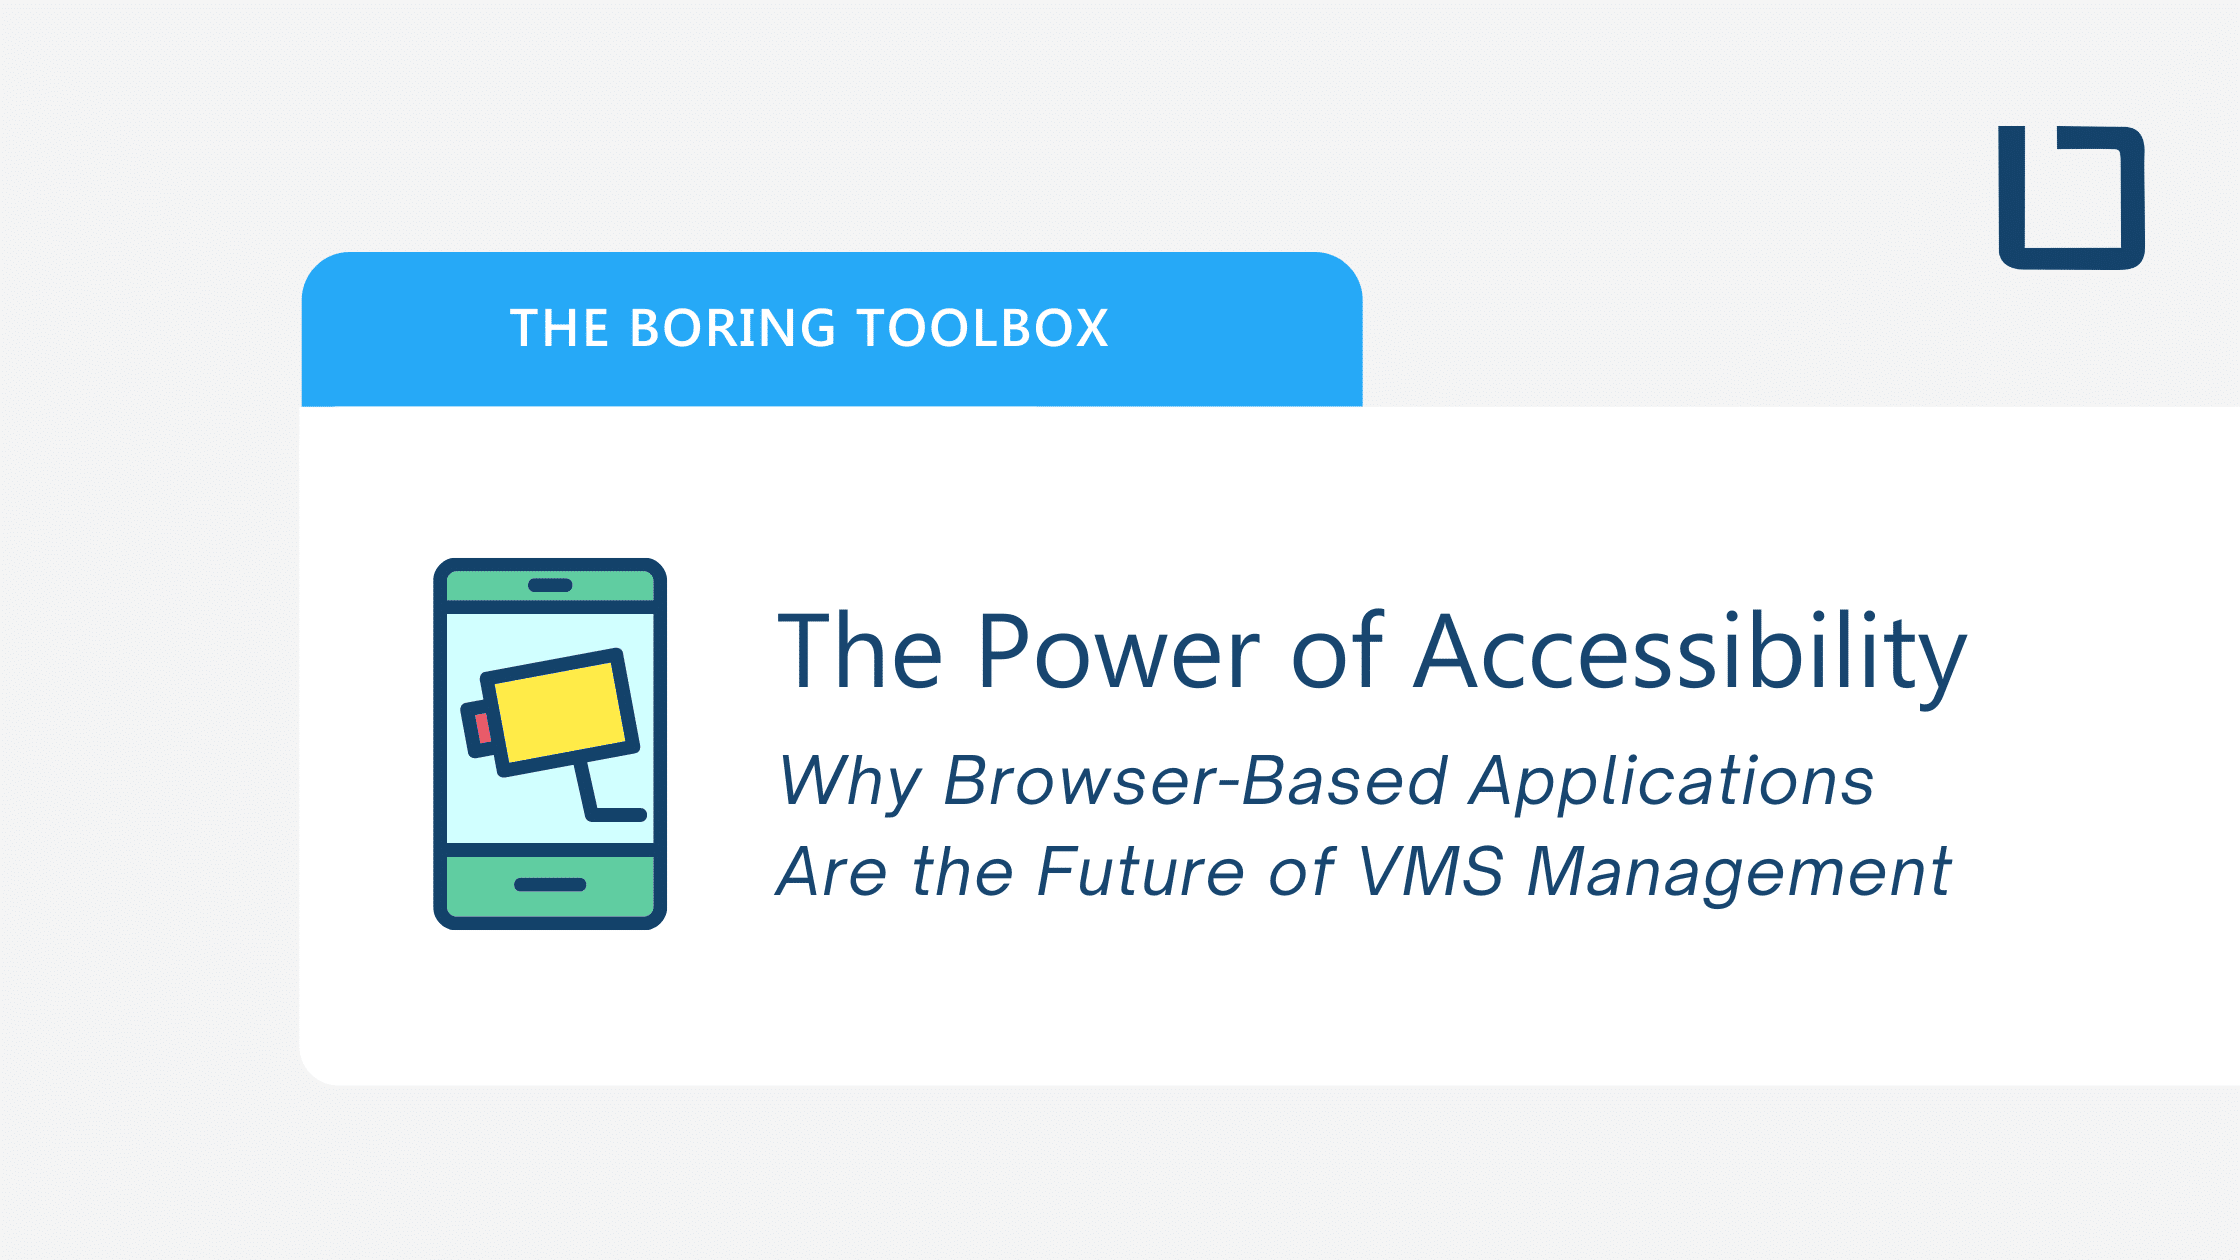 The Power of Accessibility: Why Browser-Based Applications Are the Future of VMS Management